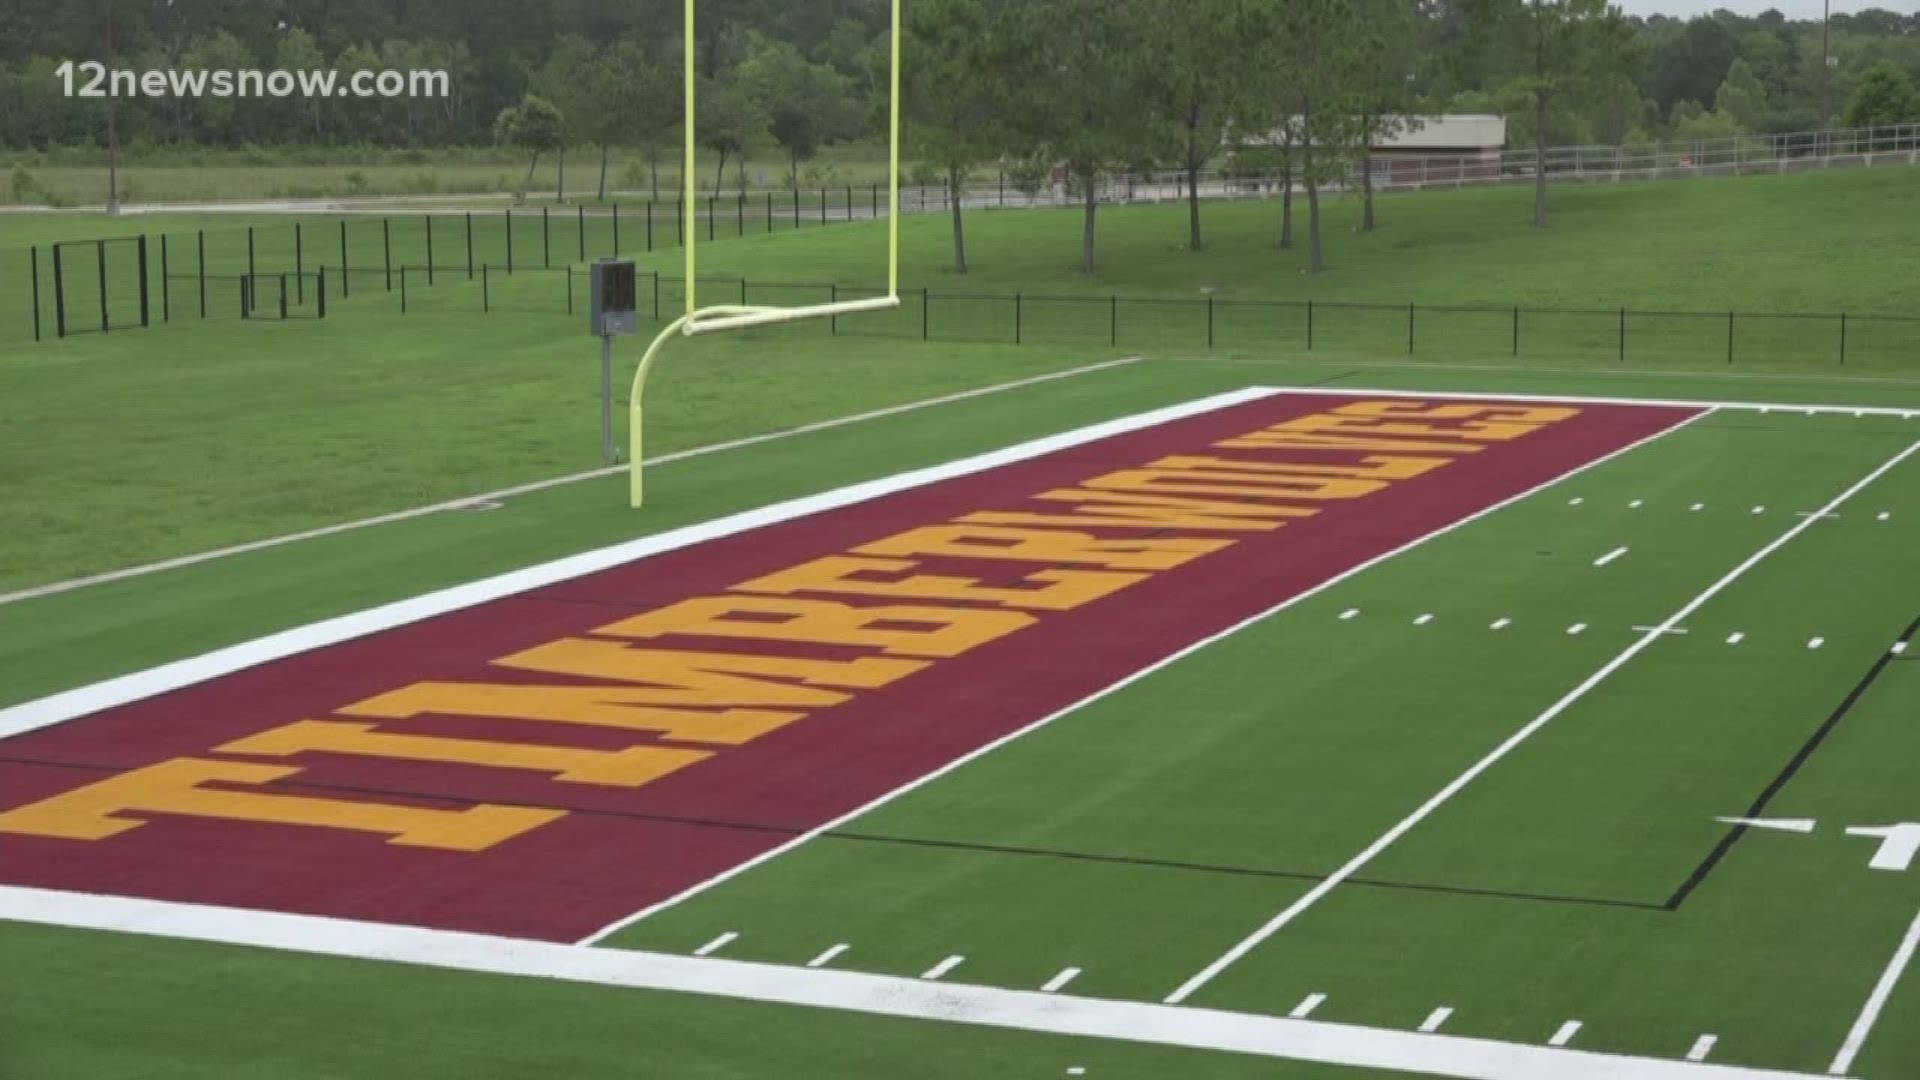 Beaumont ISD unveils their new football turf at the Thomas Center